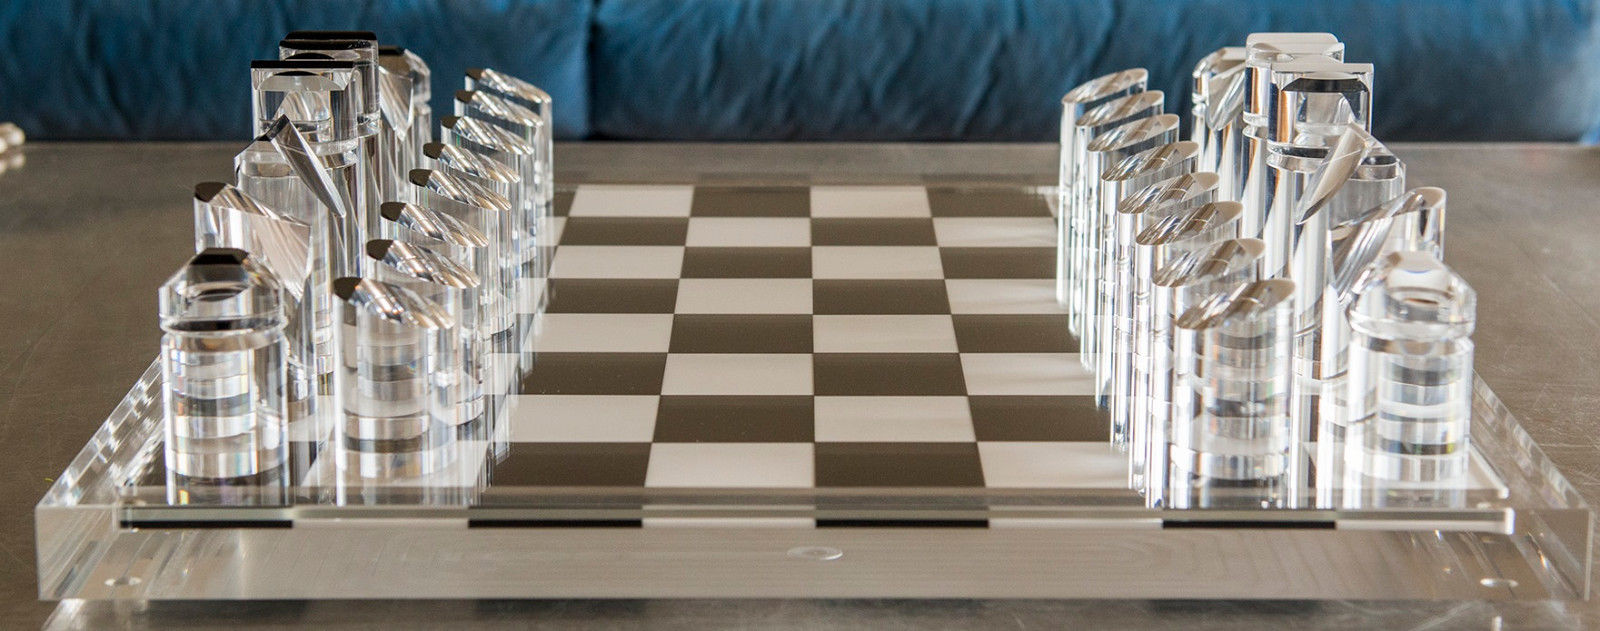 Chess_Set_made_of_Perspex_2